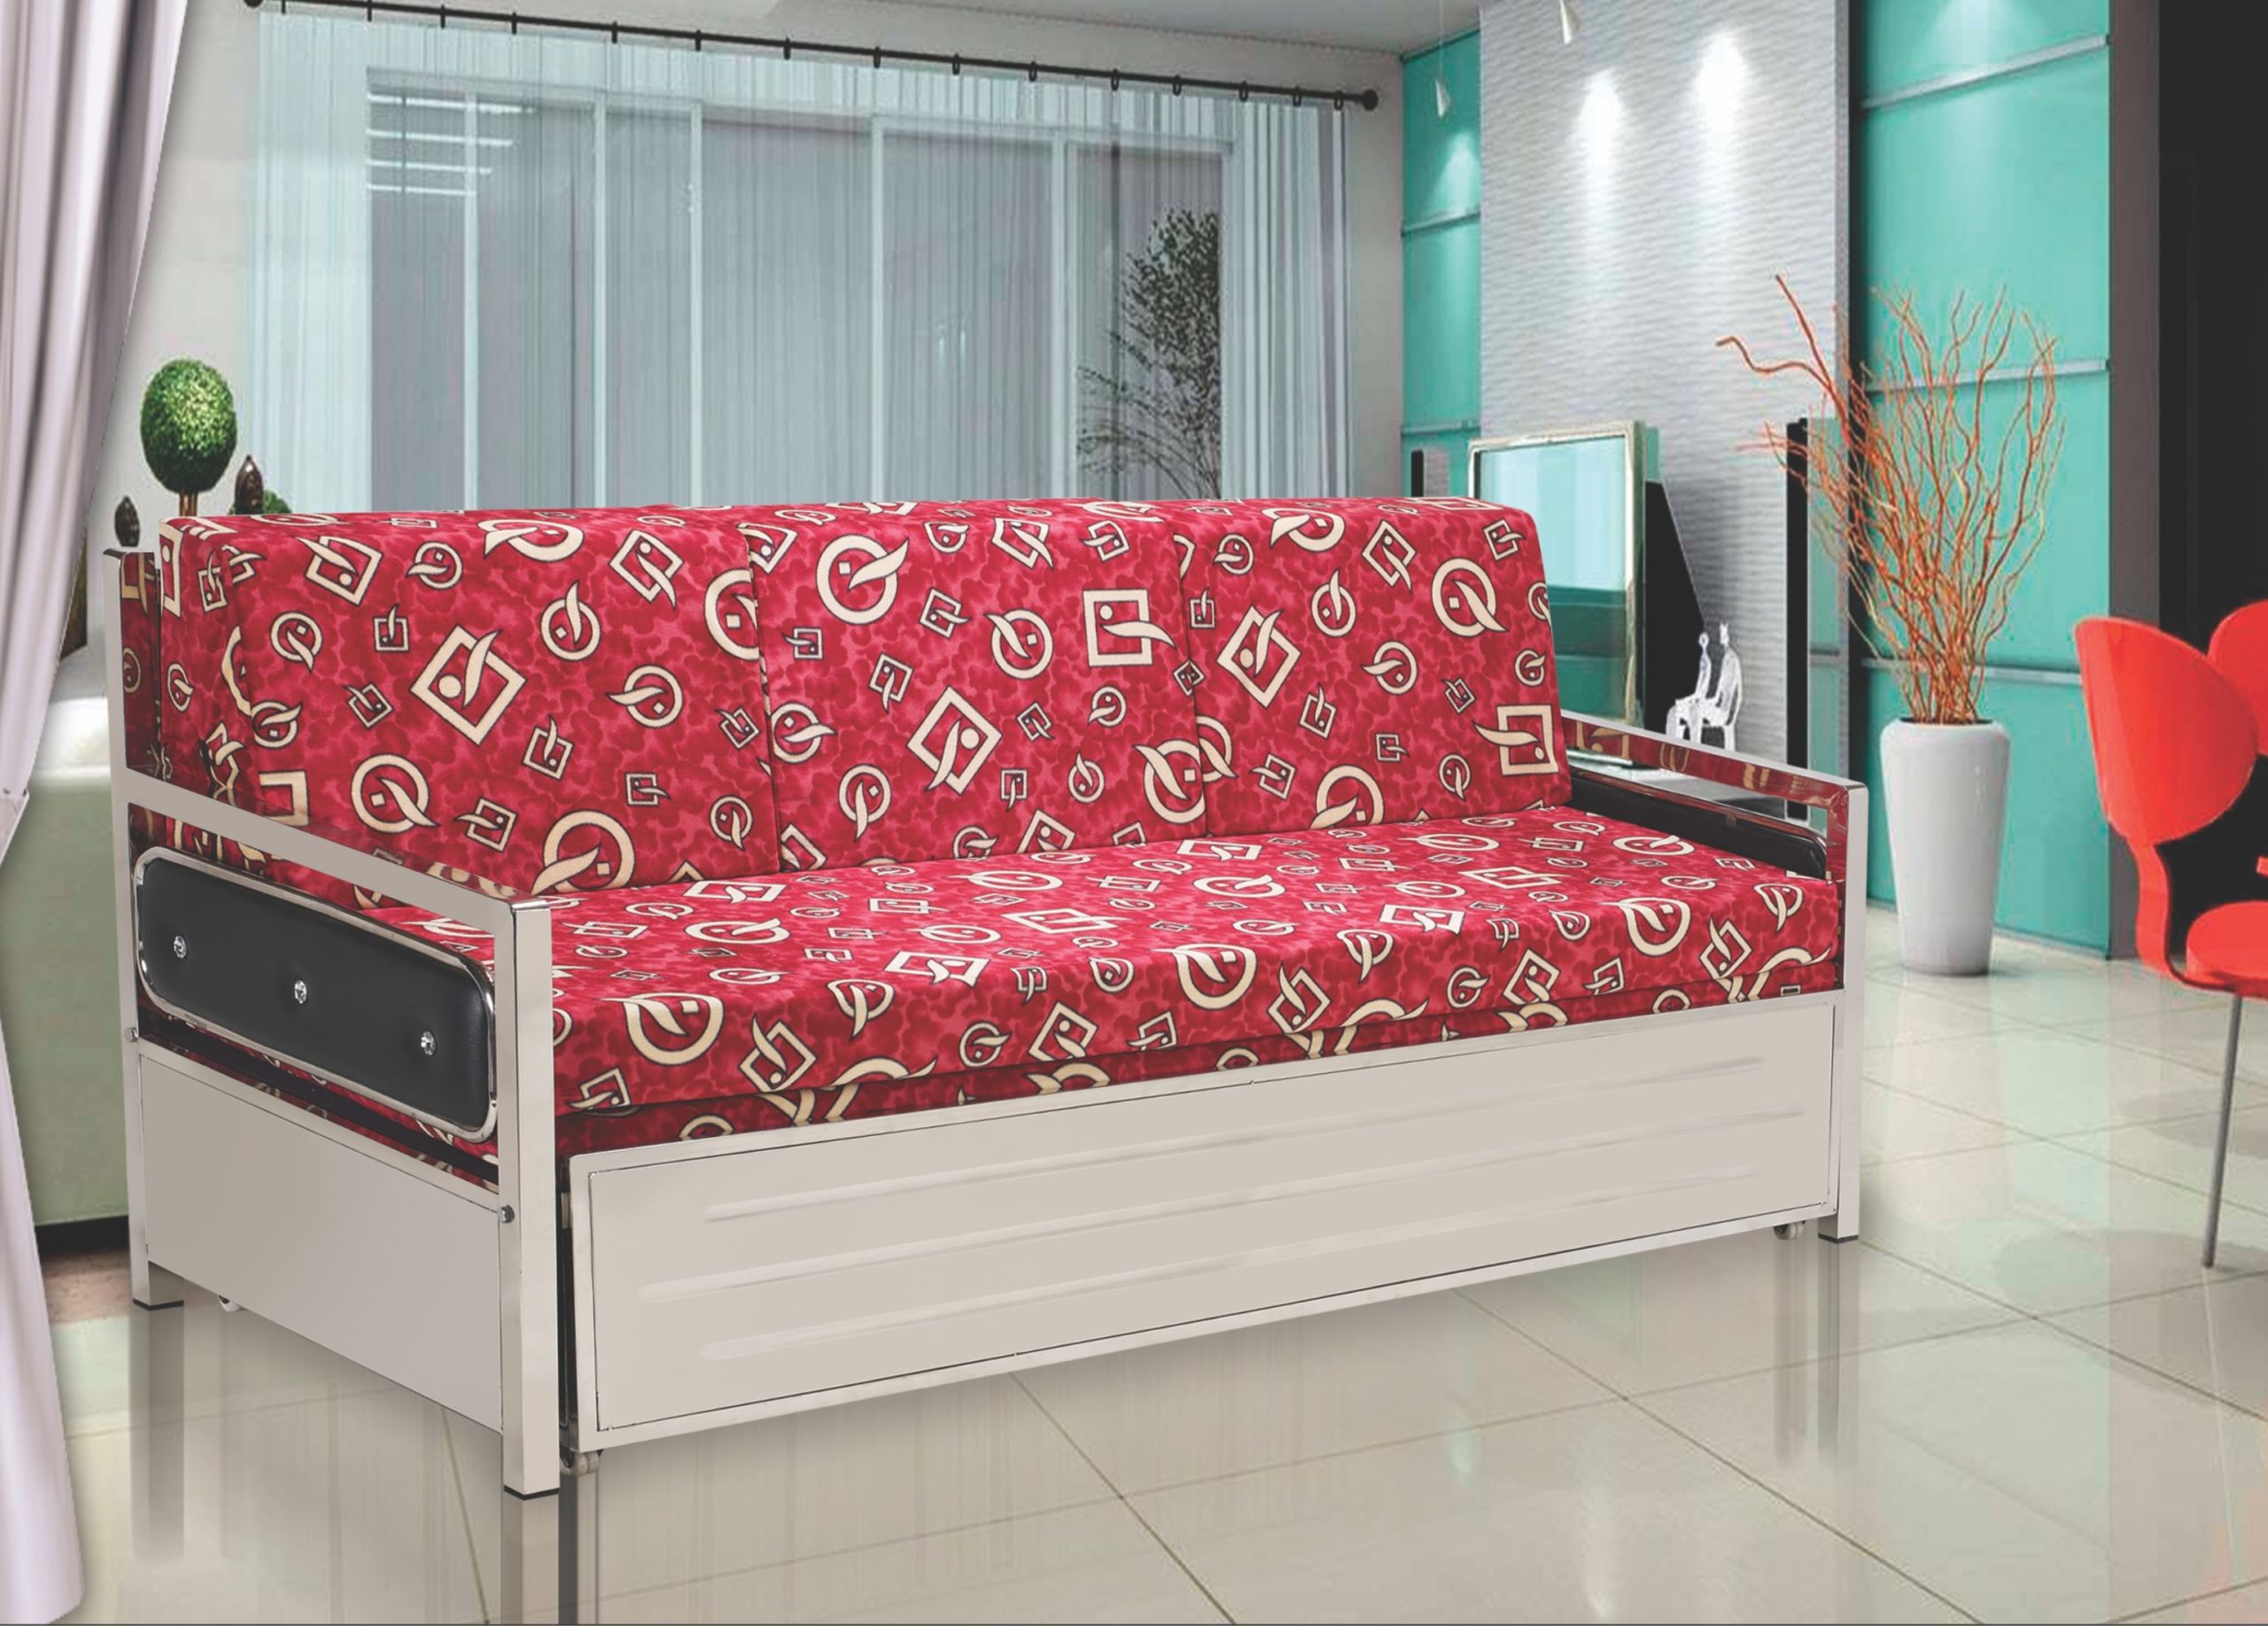 stainless steel sofa bed frame